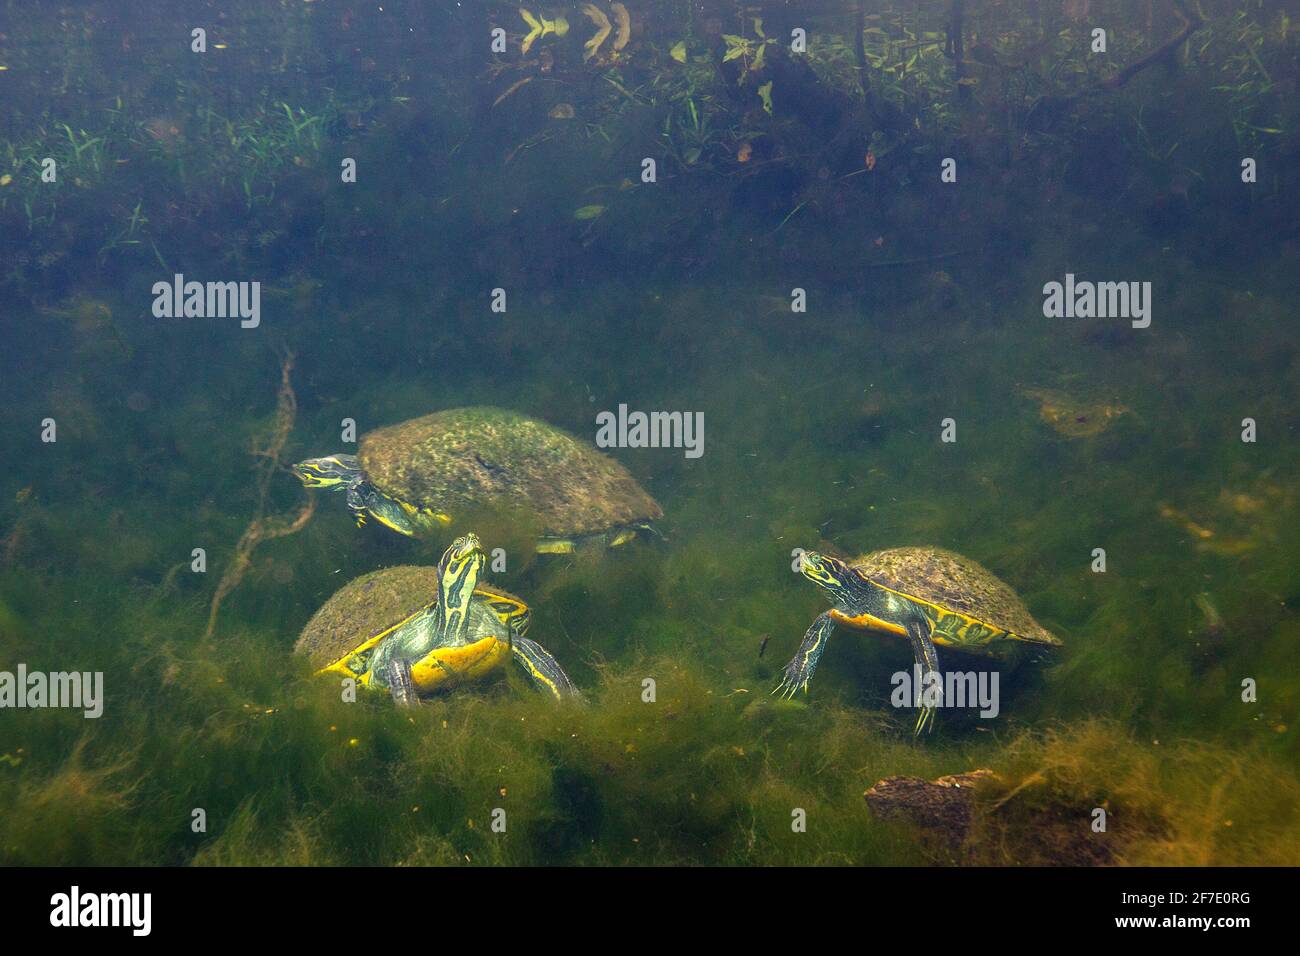 Suwannee cooter, Pseudemys concinna suwanniensis, foraging in a clear spring. Stock Photo